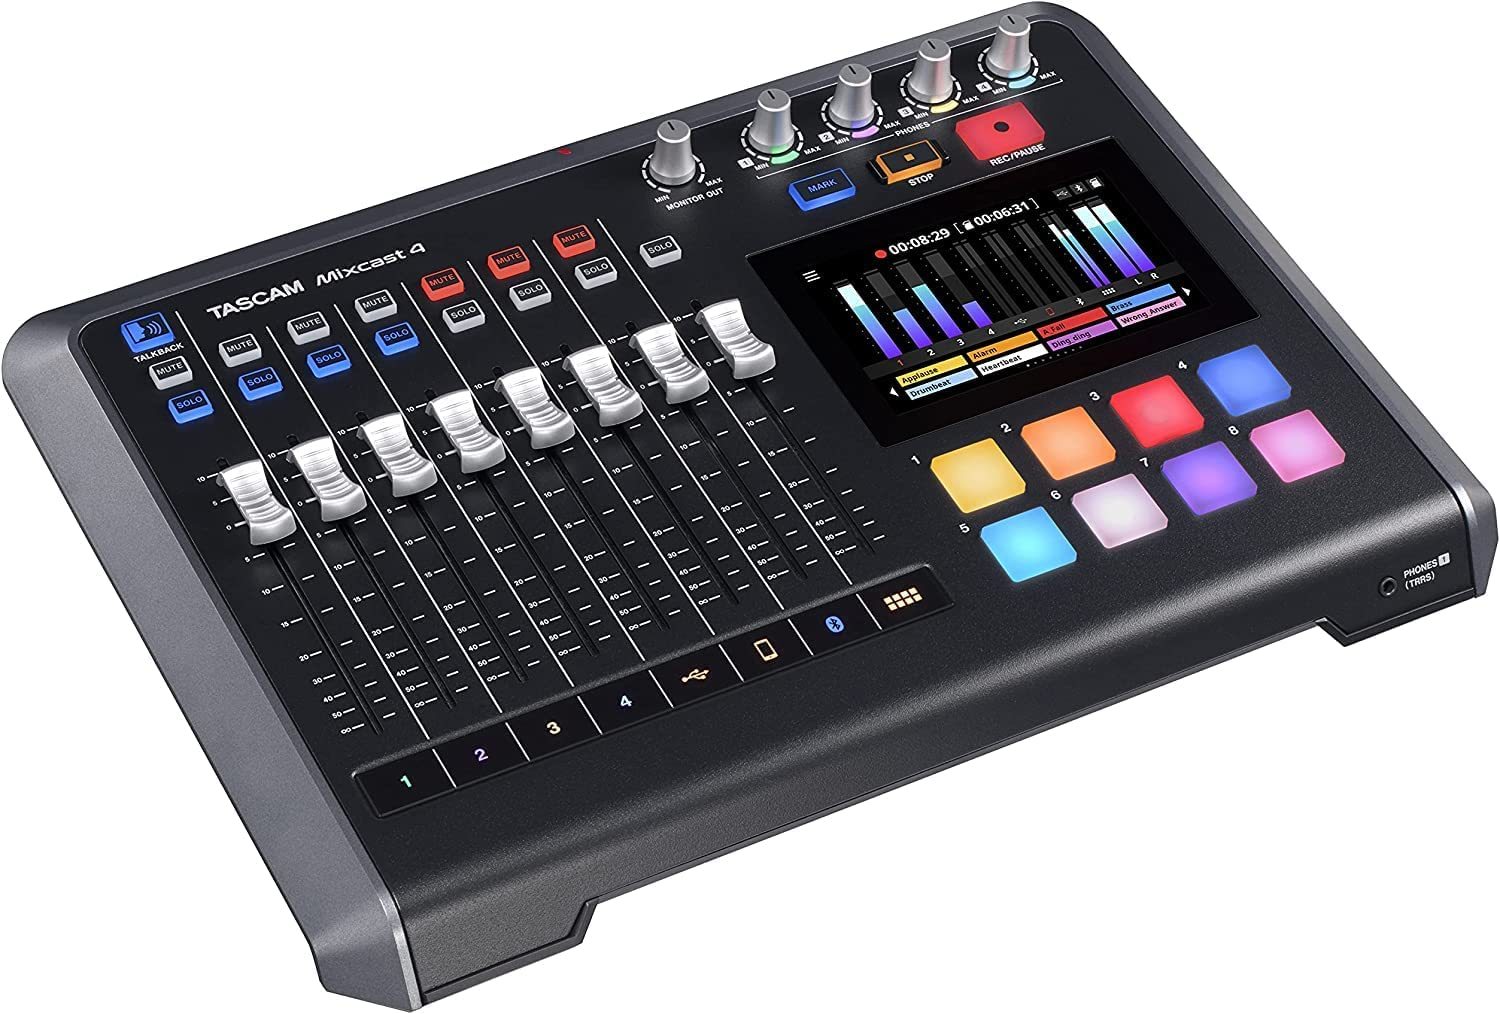 Tascam Mixcast 4 Podcast Studio Mixer Station with built-in Recorder / USB Audio - $477.99